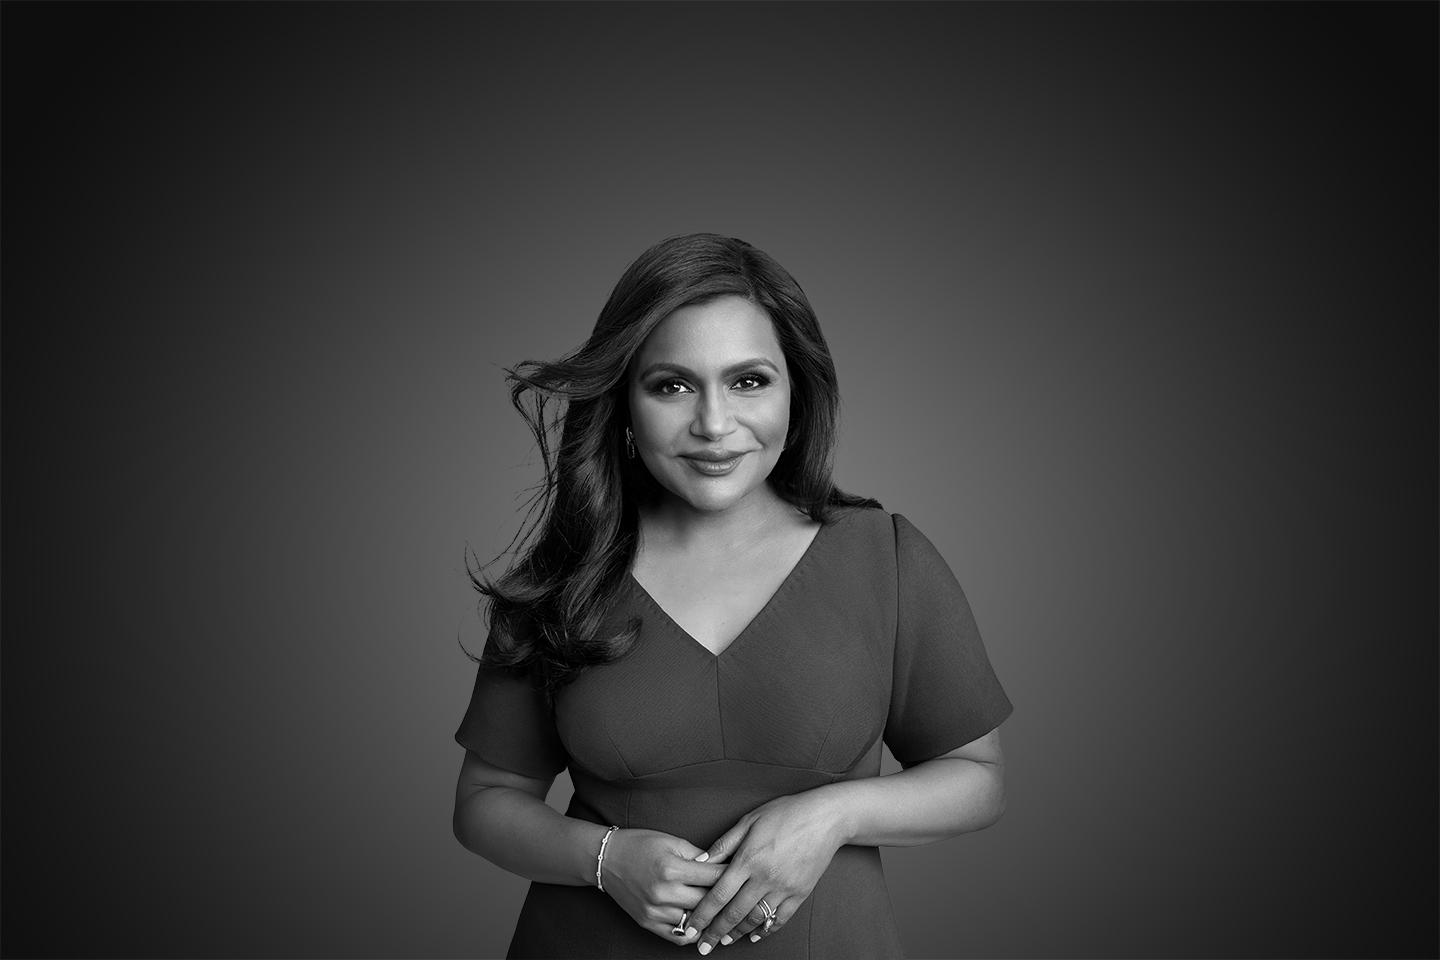 Mindy Kaling 01 asks “Why Not You?” Dartmouth Campaign